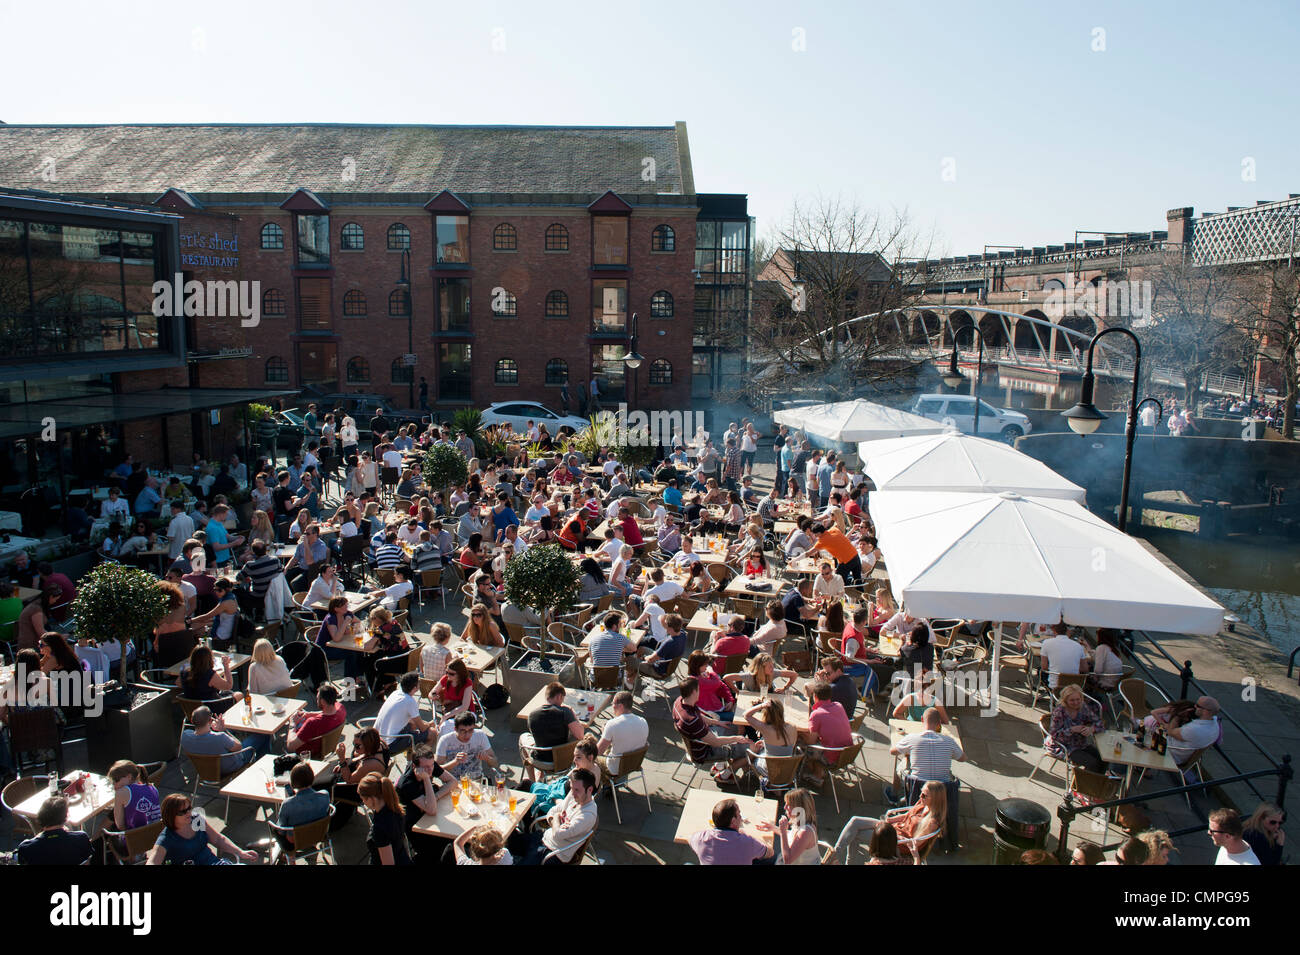 Revellers enjoy the evening sunshine in a beer garden in Castlefield in Manchester (Editorial use only). Stock Photo